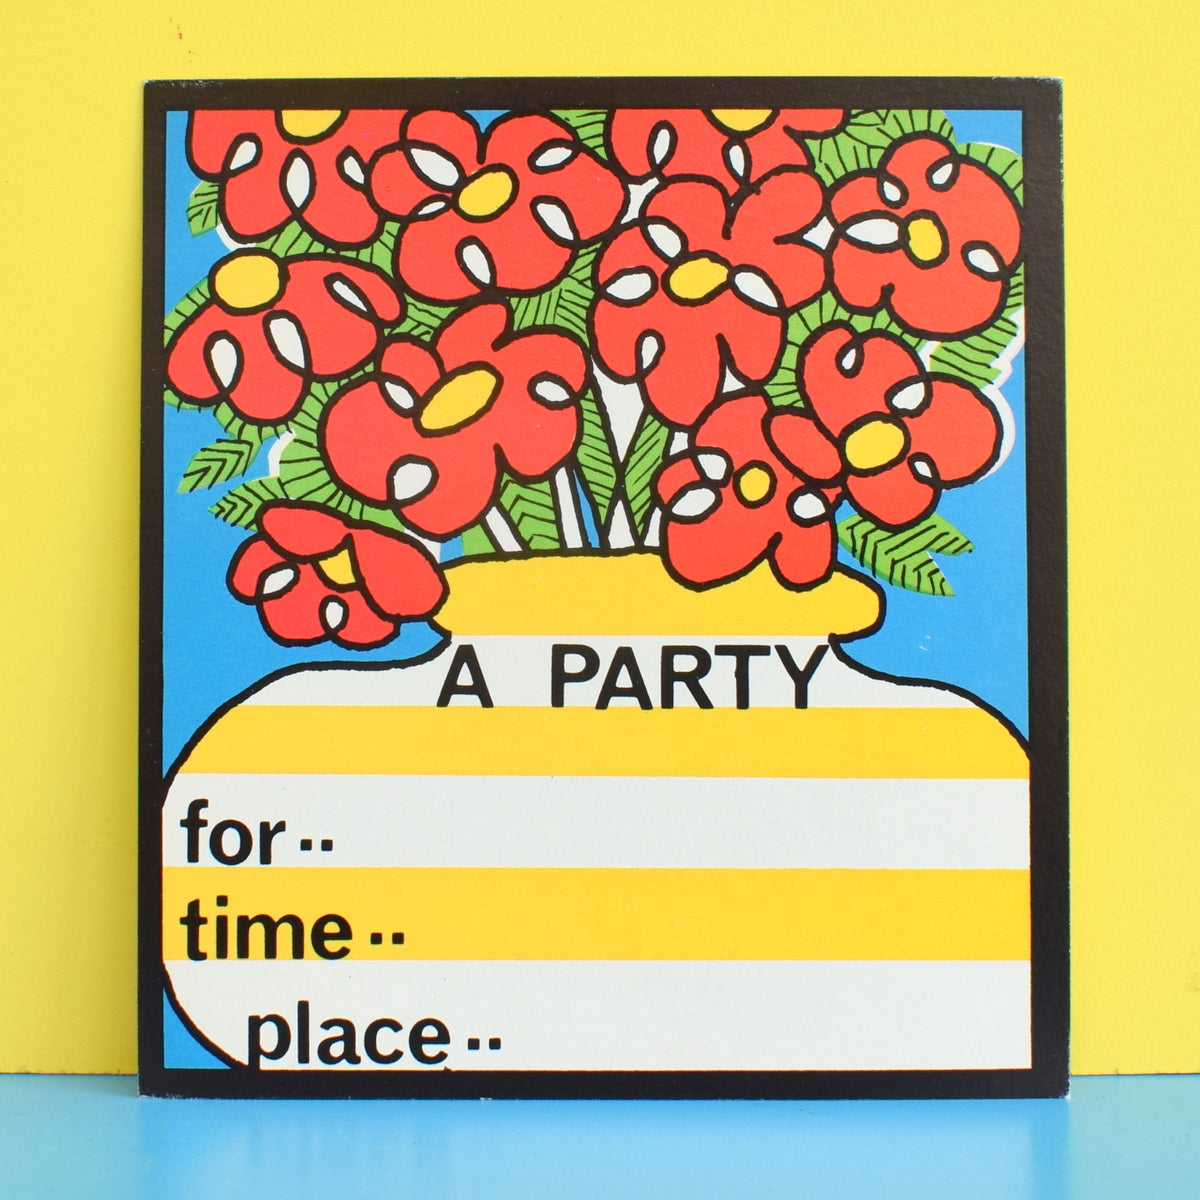 Vintage 1970s American Party Invitations - Flower Power - Multiples - Red & Yellow